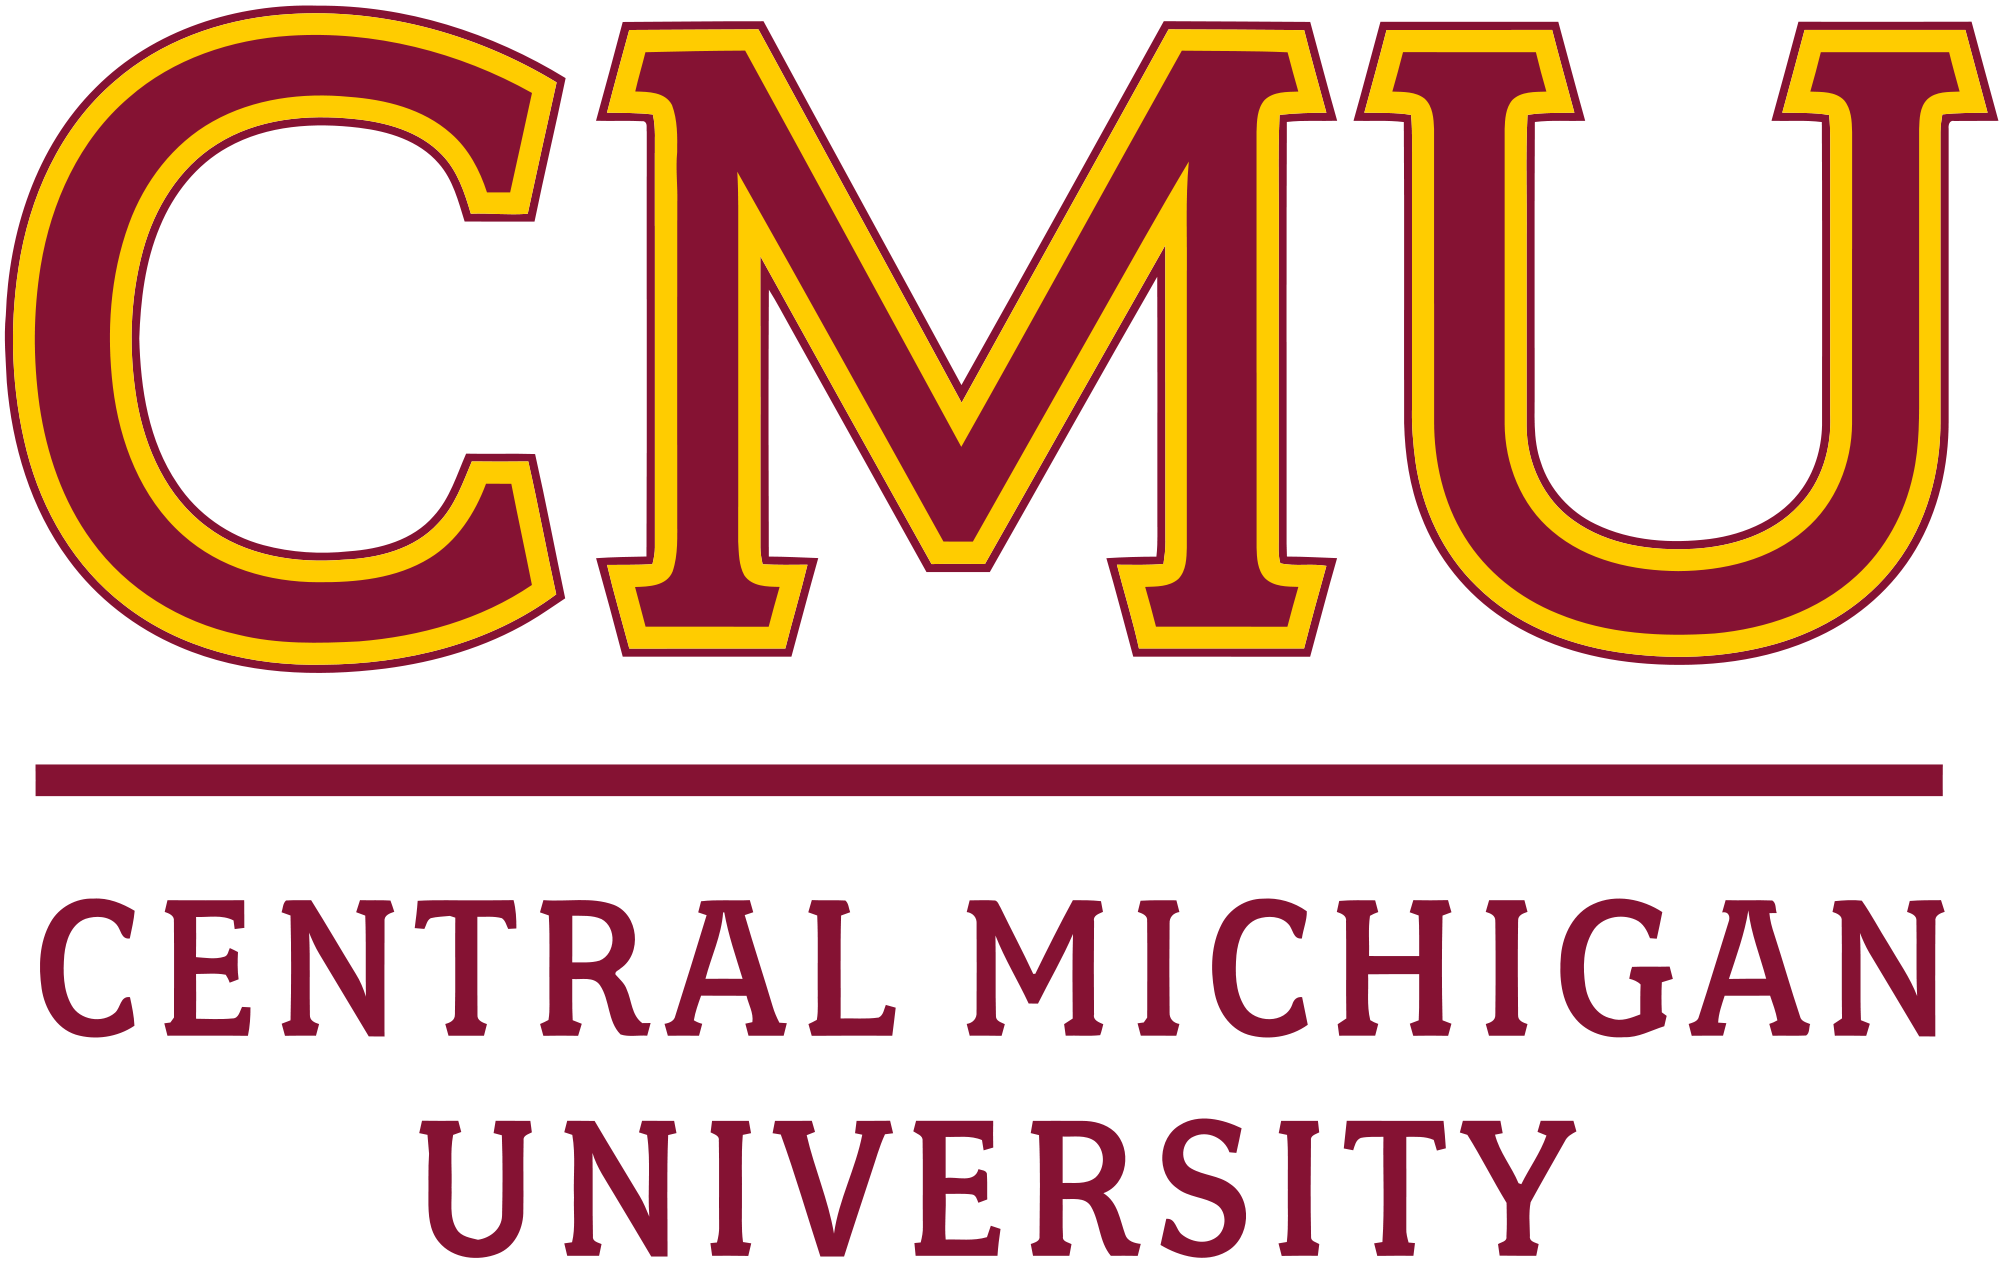 Open Letter To University Of Michigan Central